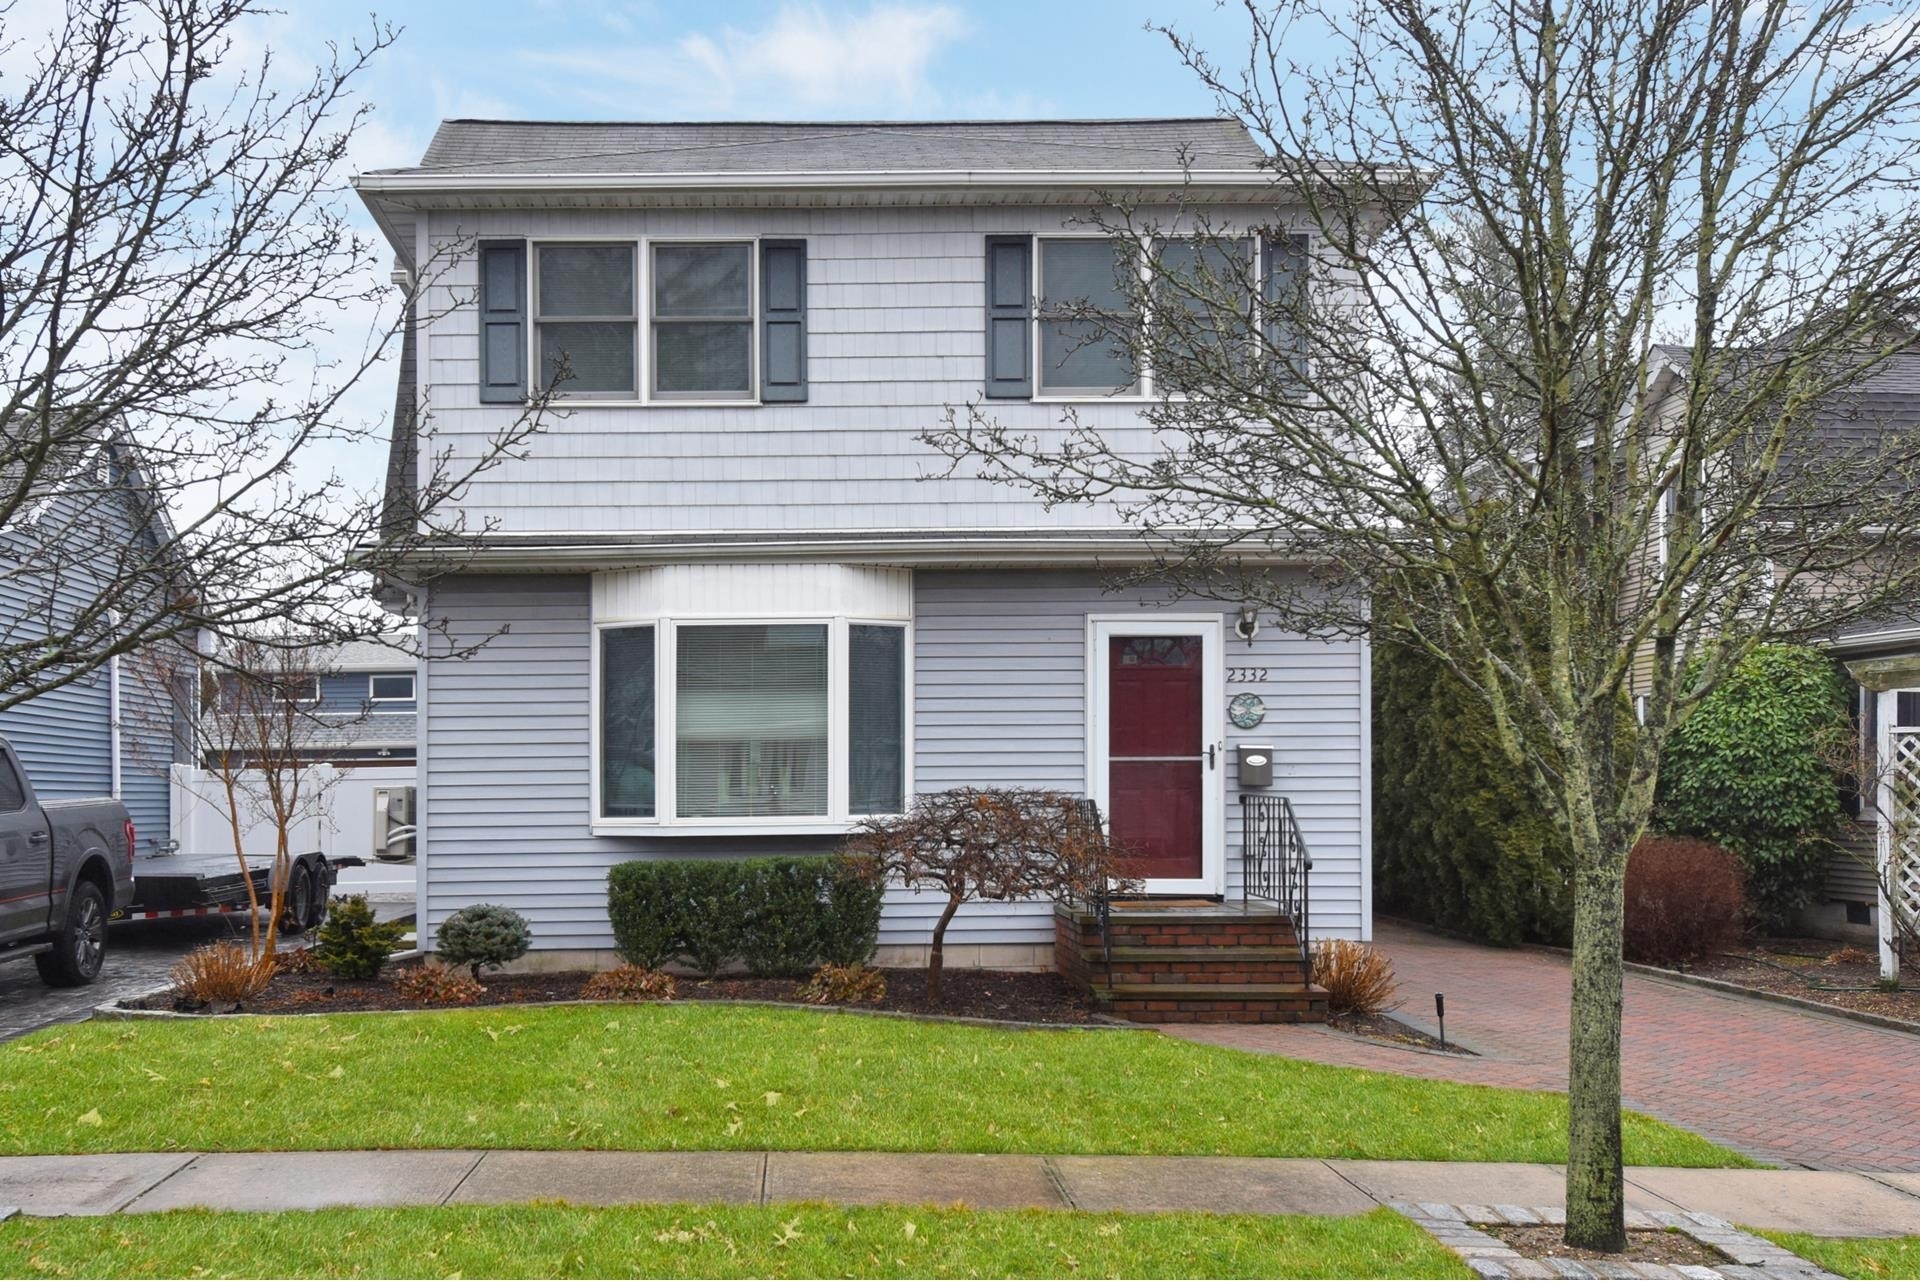 Single Family Home at North Bellmore